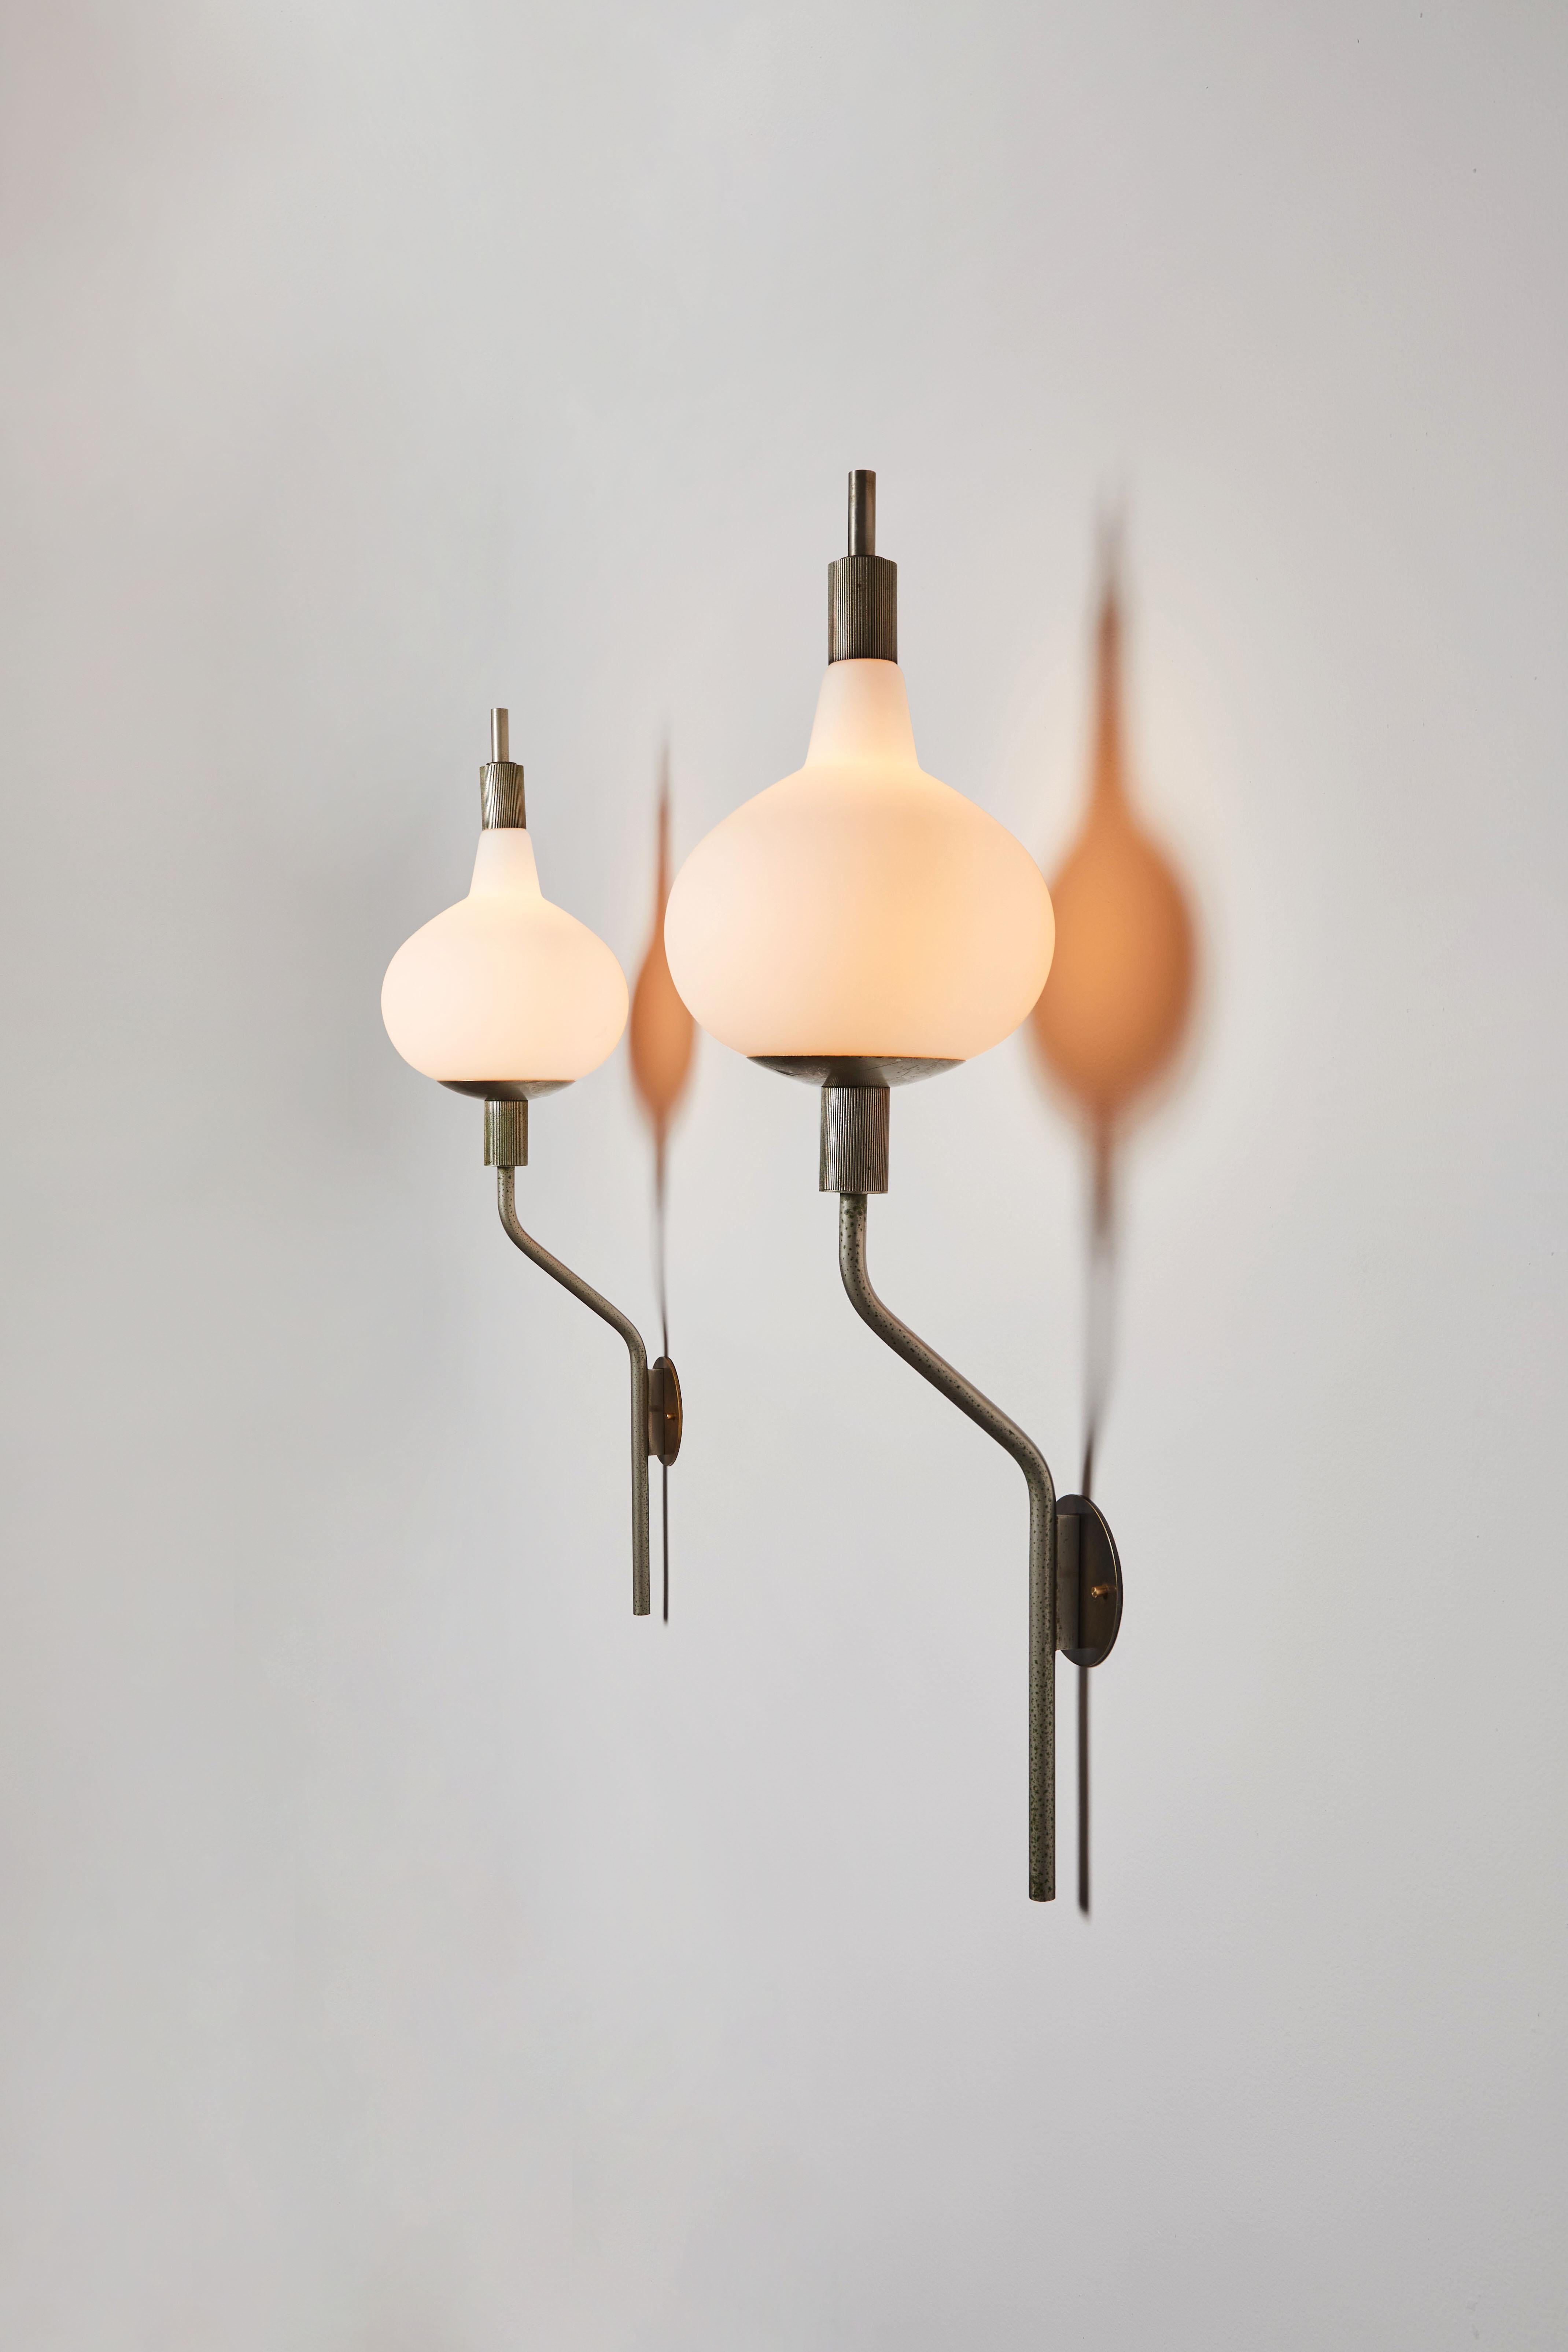 Wall lights by Candle. Manufactured in Italy, circa 1960s. Brushed satin glass diffusers, satin nickel armature, custom backplates. Rewired for U.S. standards. We recommend three E27 40w maximum candelabra bulbs per light. Bulbs provided as a one